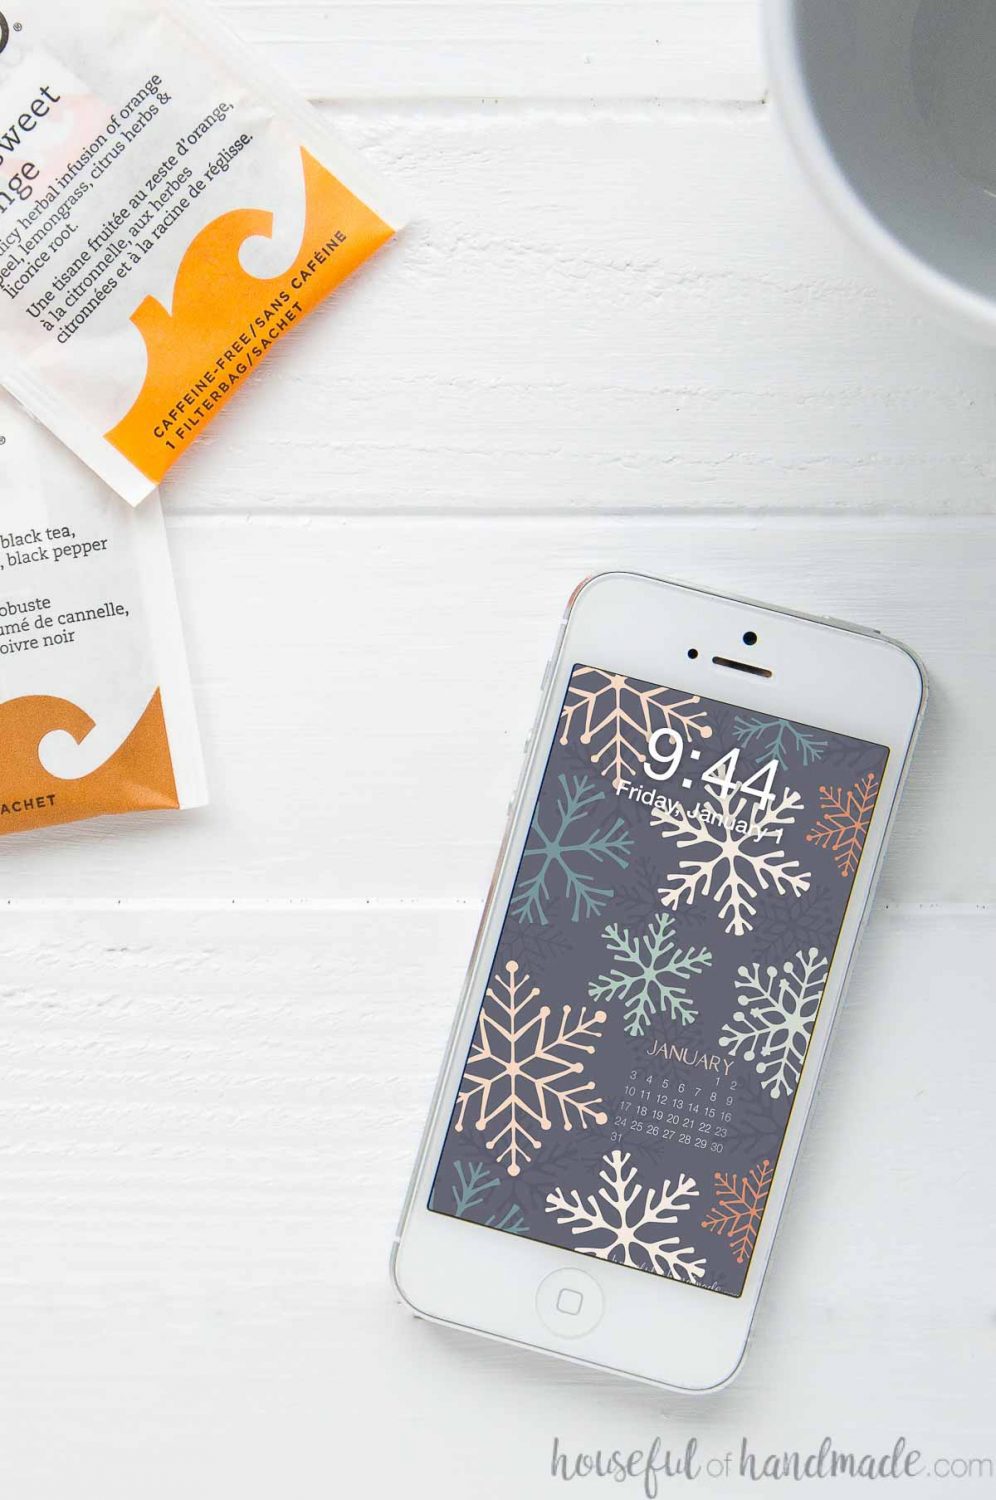 White smartphone with the free digital wallpaper for January with a calendar on the screen laying on a table by tea packets and a mug.